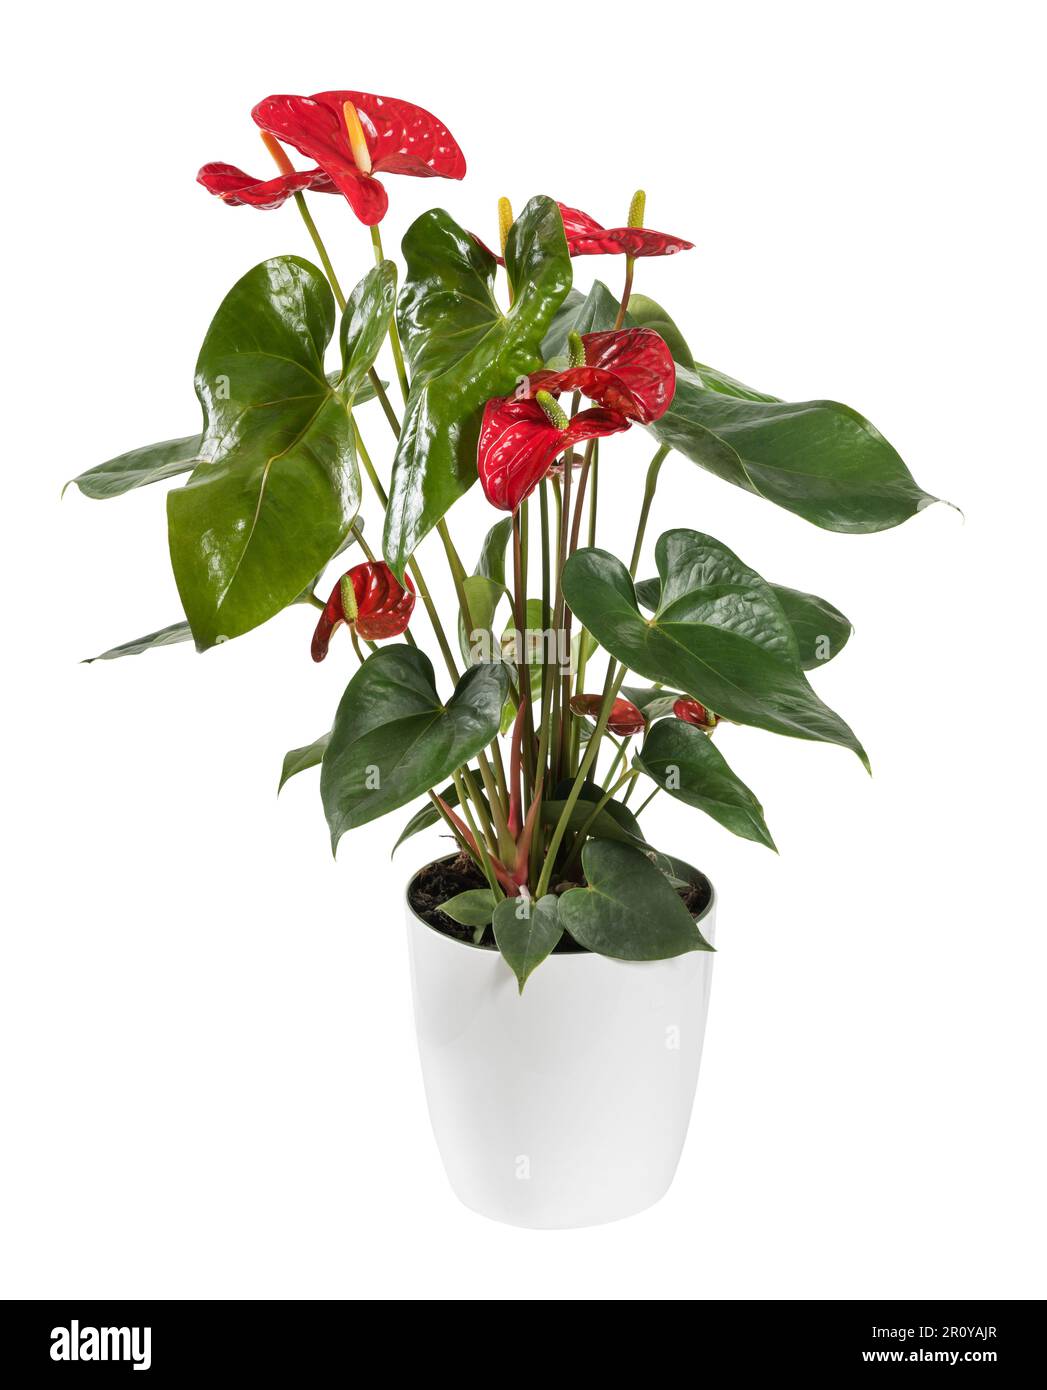 Fresh delicate red anthurium flower with green leaves growing in ceramic pot isolated on white background Stock Photo